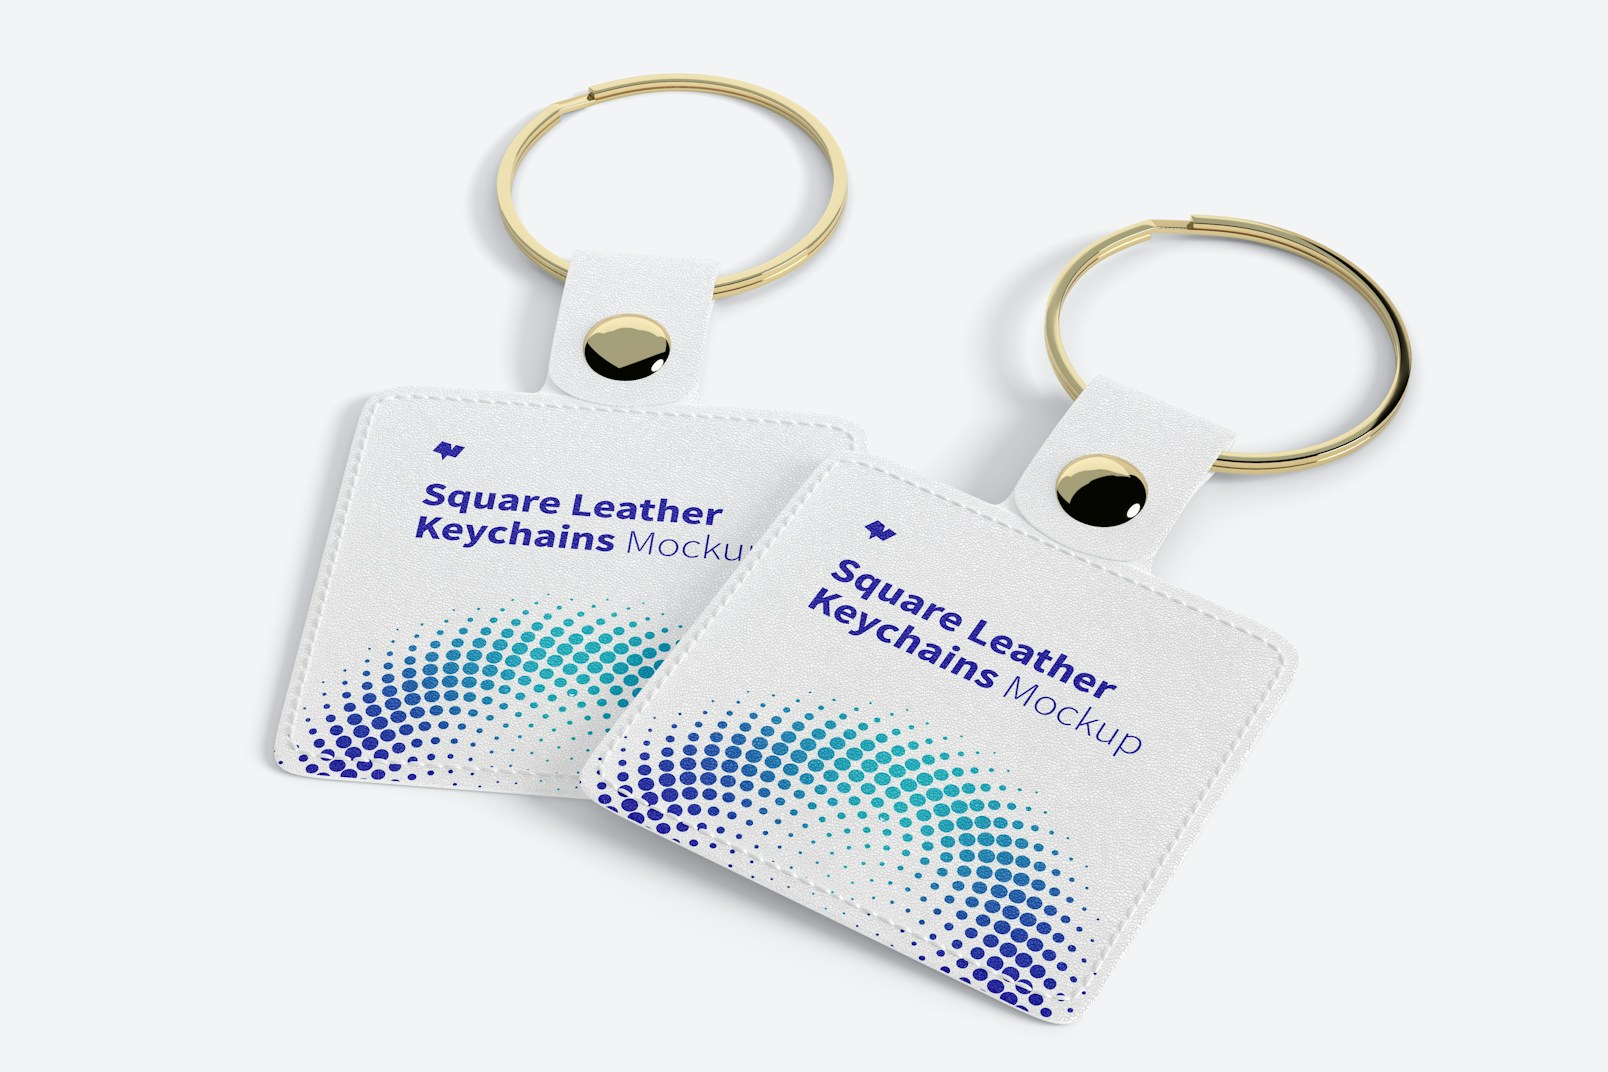 Square Leather Keychains Mockup, Perspective